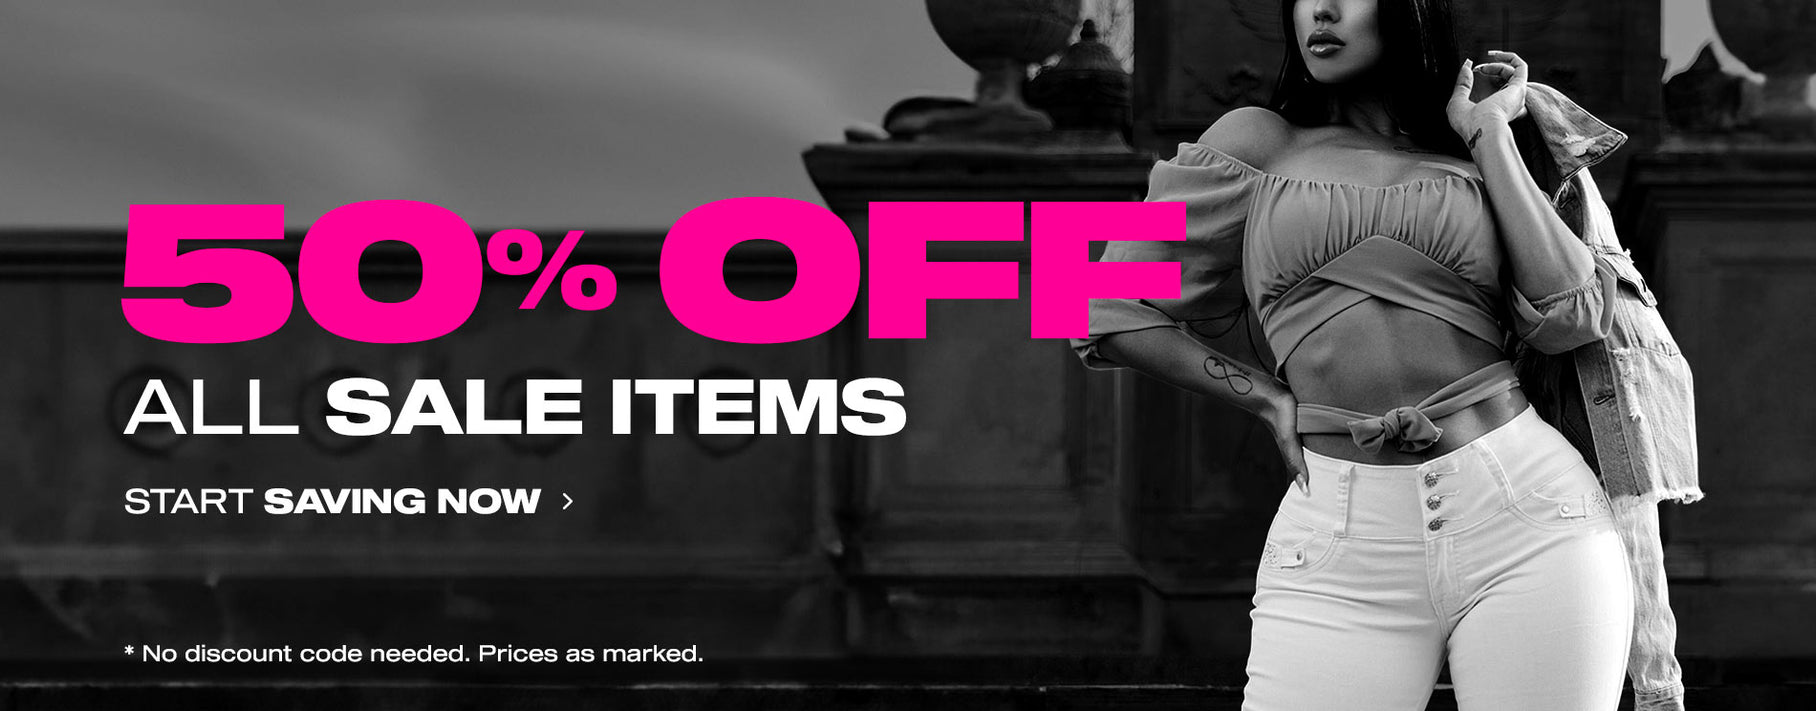 50% Off All Sale Items: Start Saving Now! No Discount Code Needed. Prices As Marked.